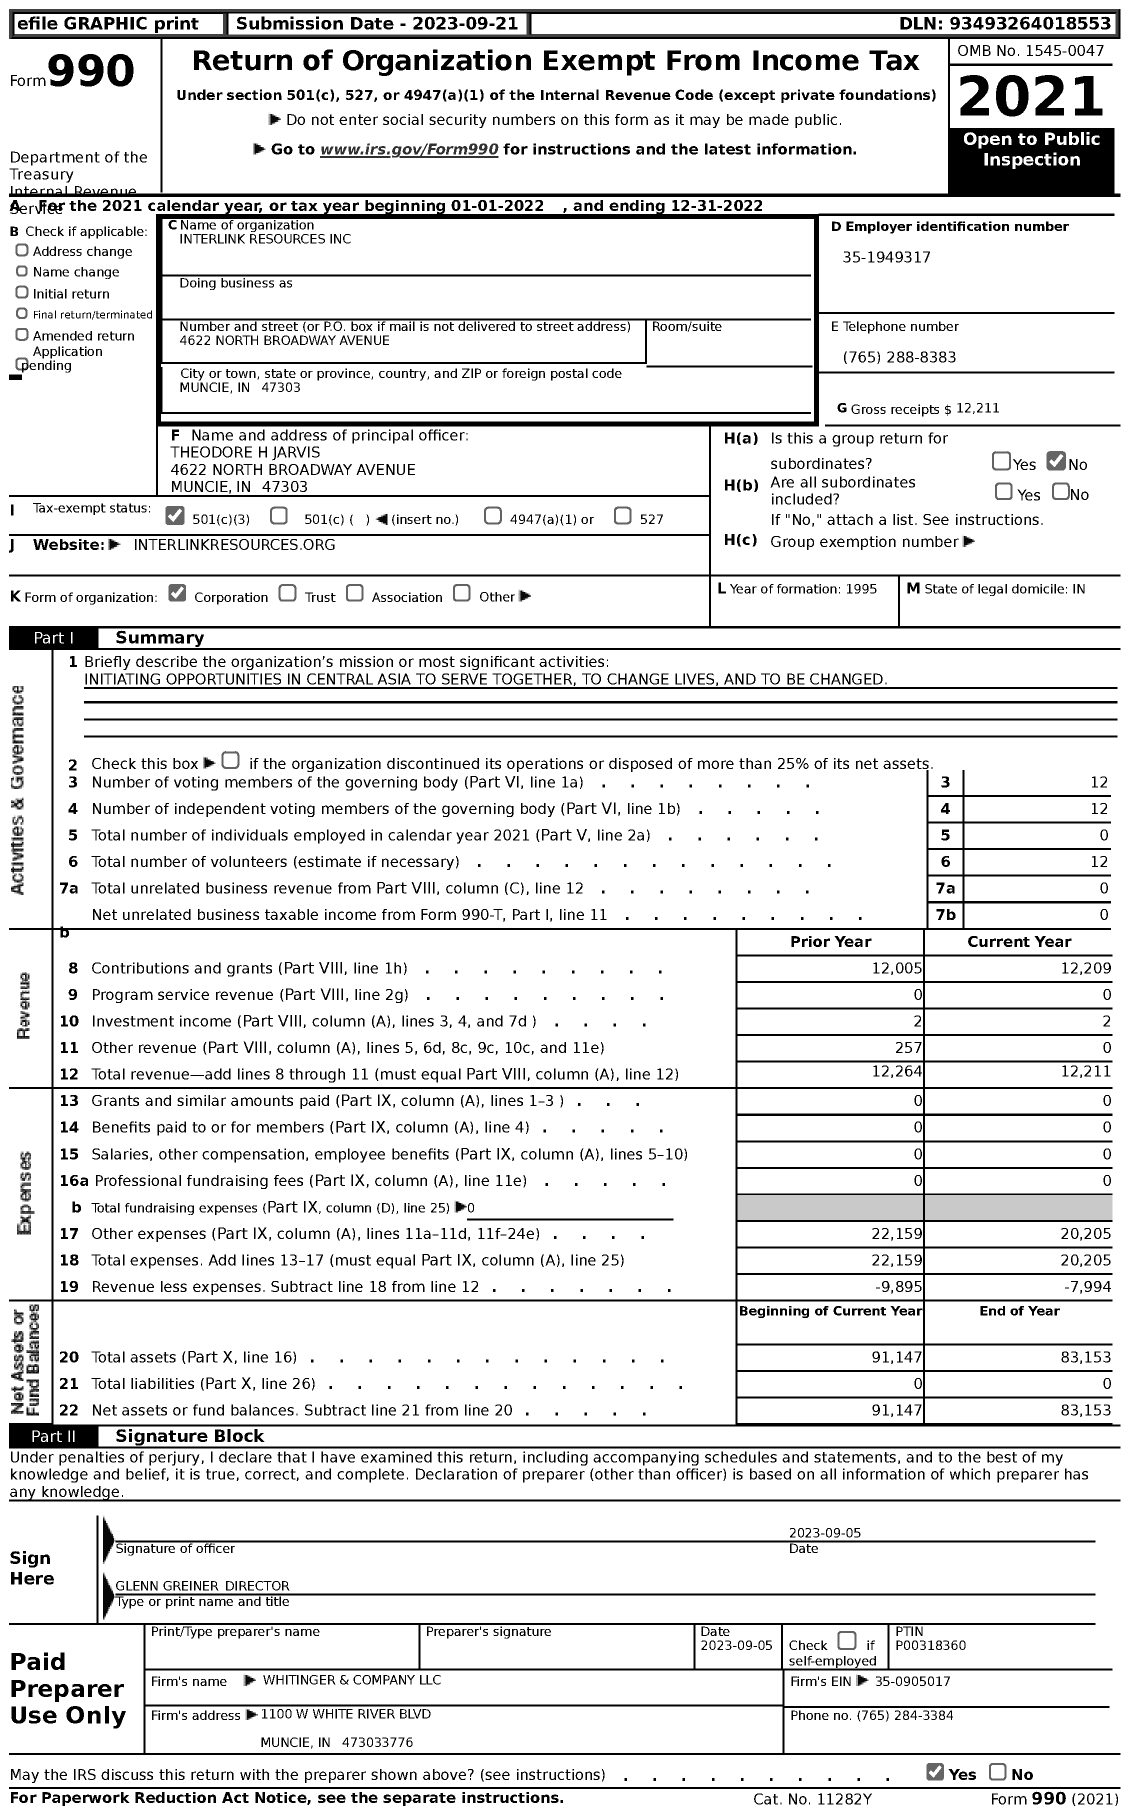 Image of first page of 2022 Form 990 for Interlink Resources